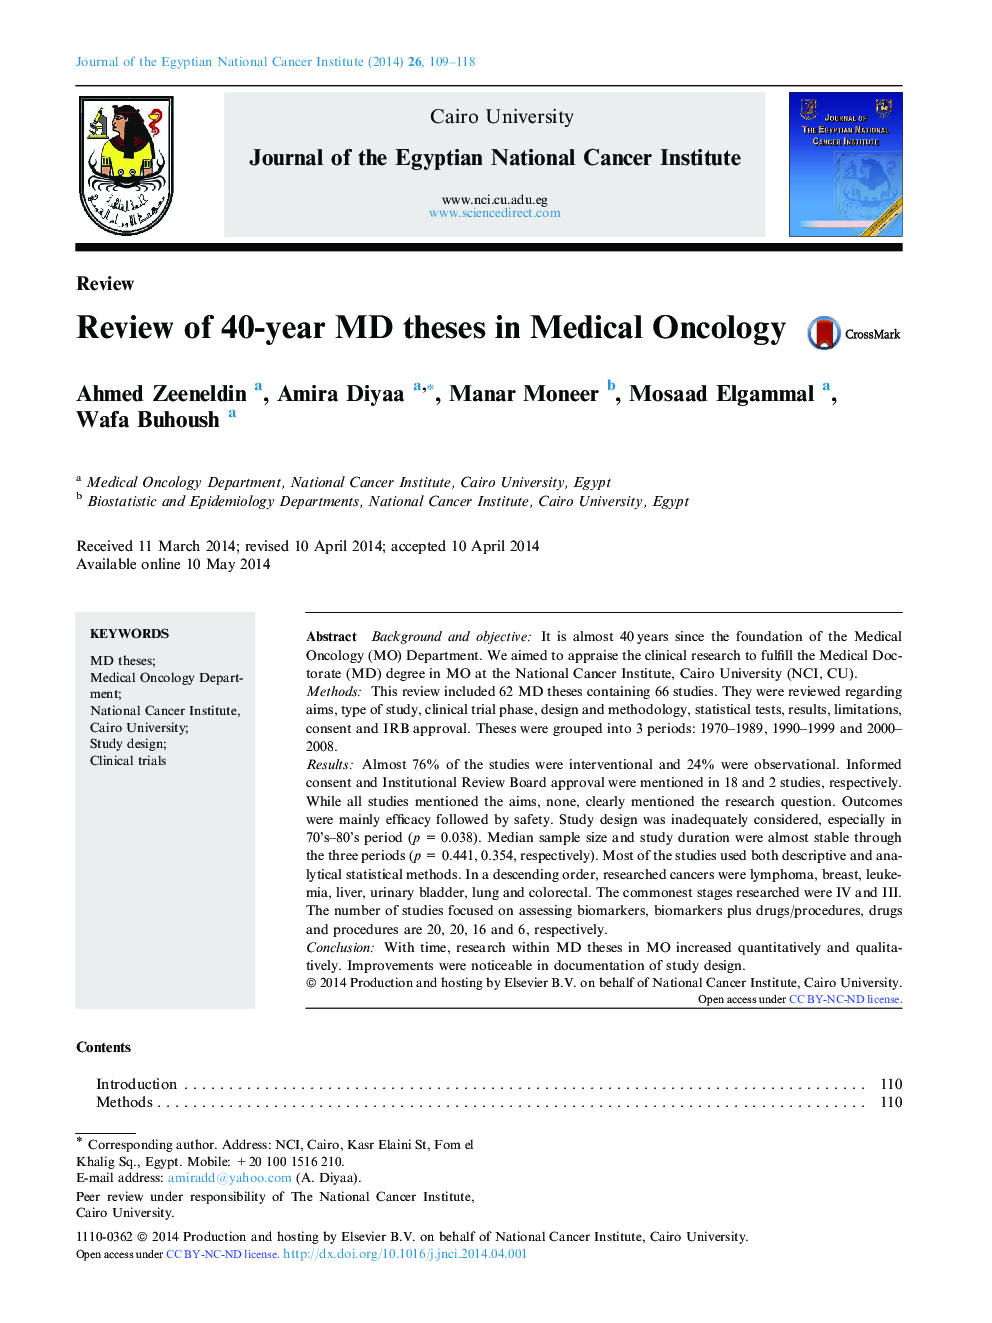 Review of 40-year MD theses in Medical Oncology 